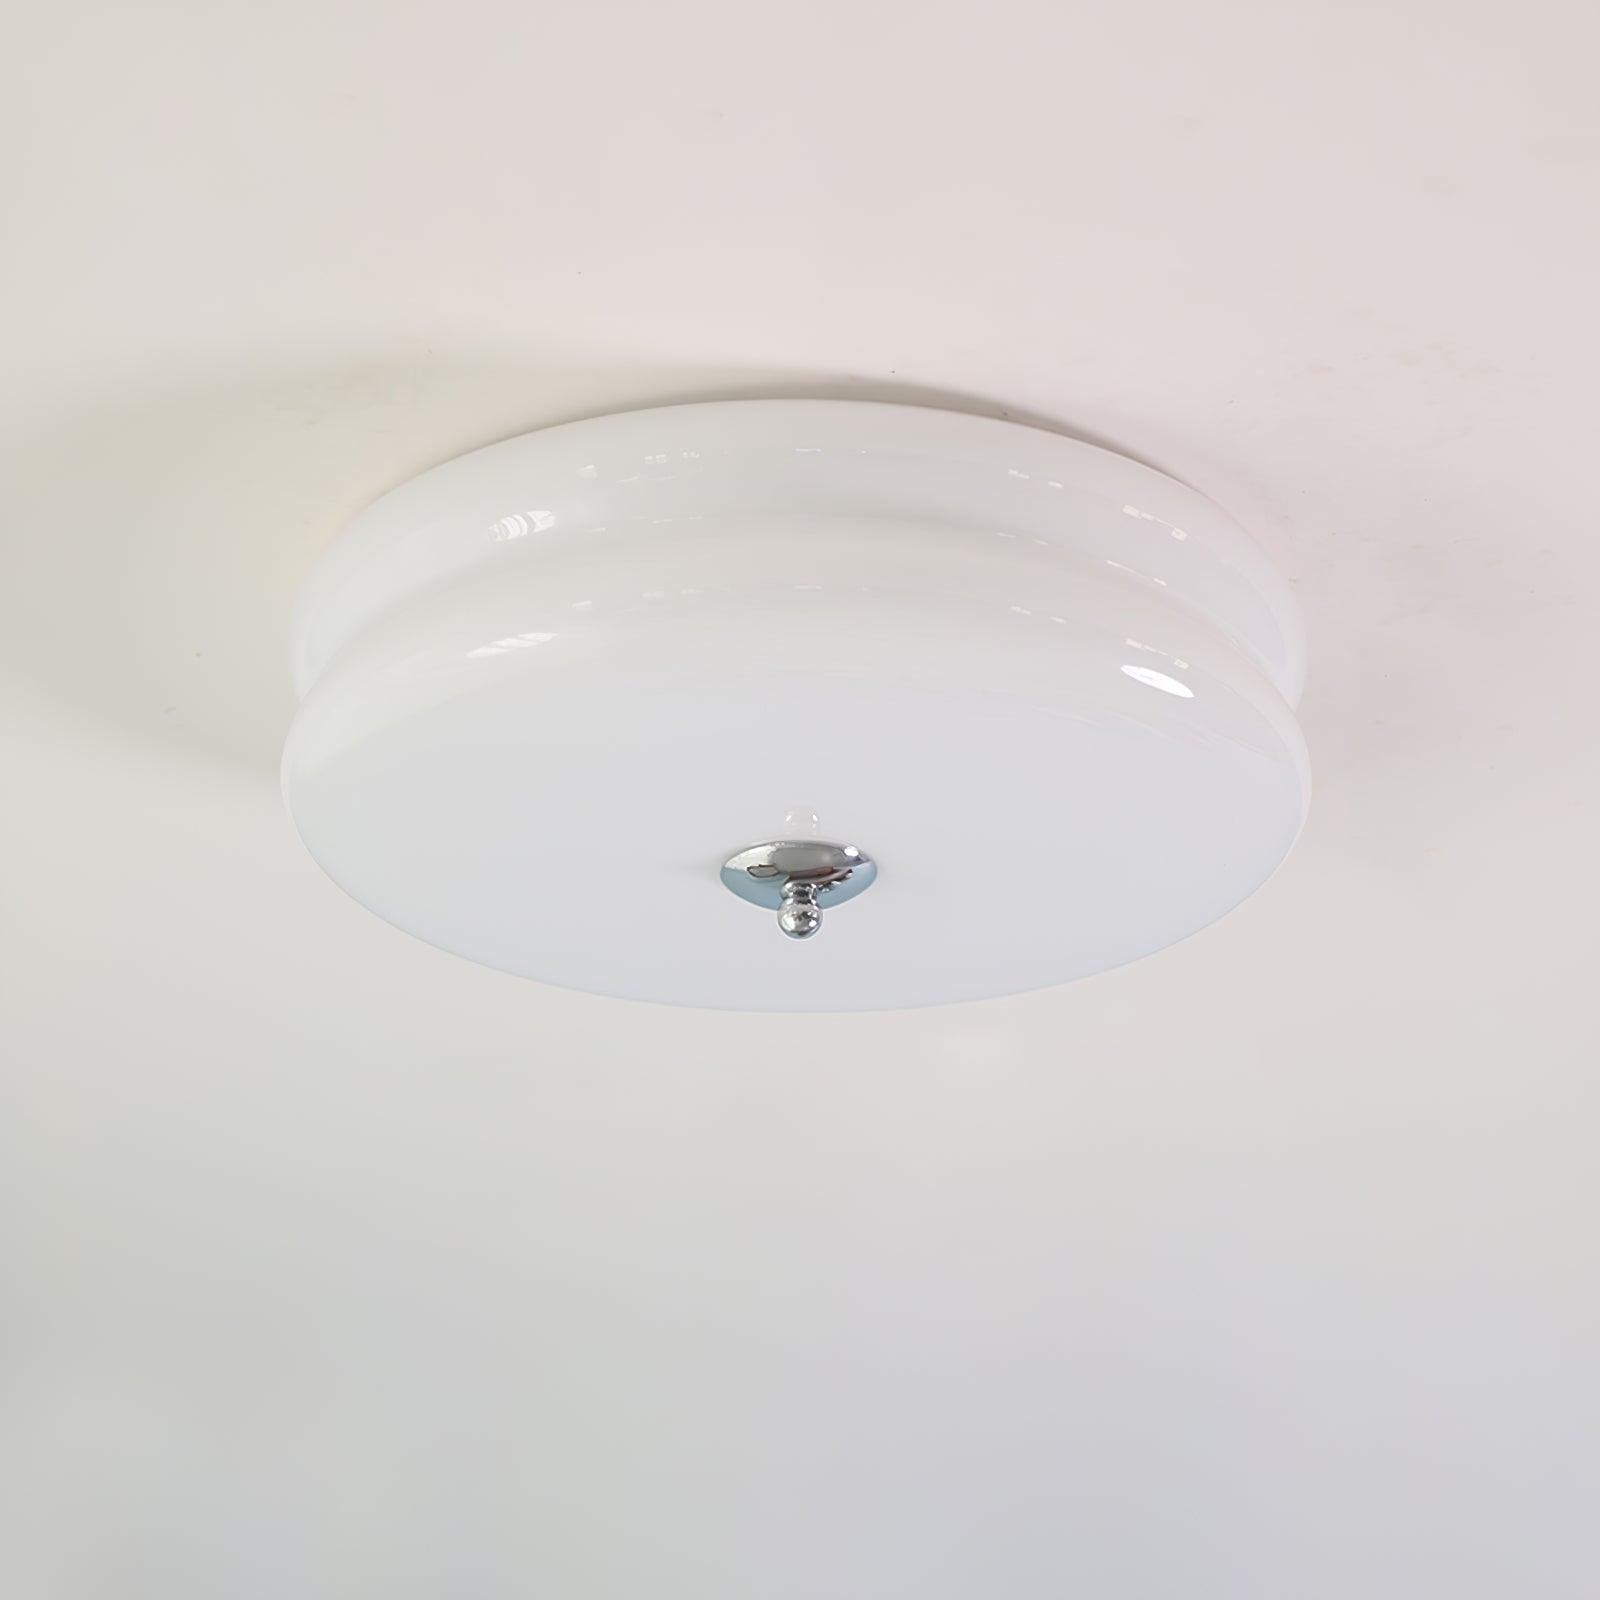 Vintage Art Deco Ceiling Light with Chrome and White Finish, emits Cool Light, measures 15.7" in Diameter and 5.1" in Height (40cm x 13cm)